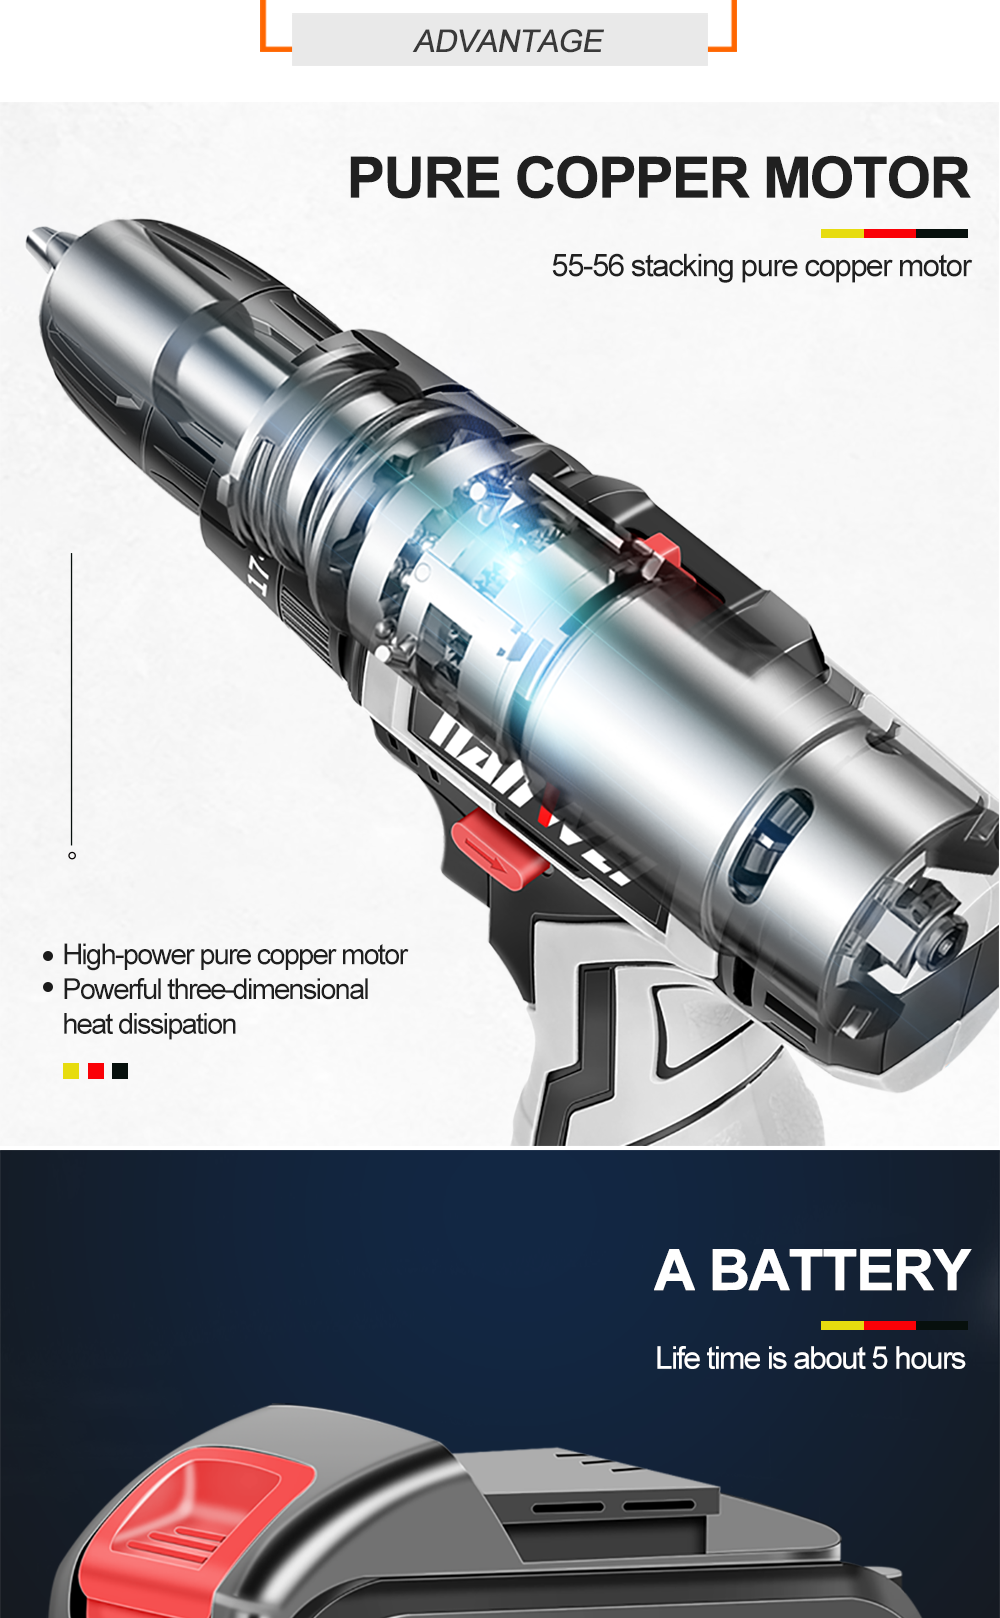 Nanwei-21V-Brushless-Impact-Power-Drill-35NM-Li-ion-Rechargeable-Electric-Flat-Drill-Screw-Driver-2--1695400